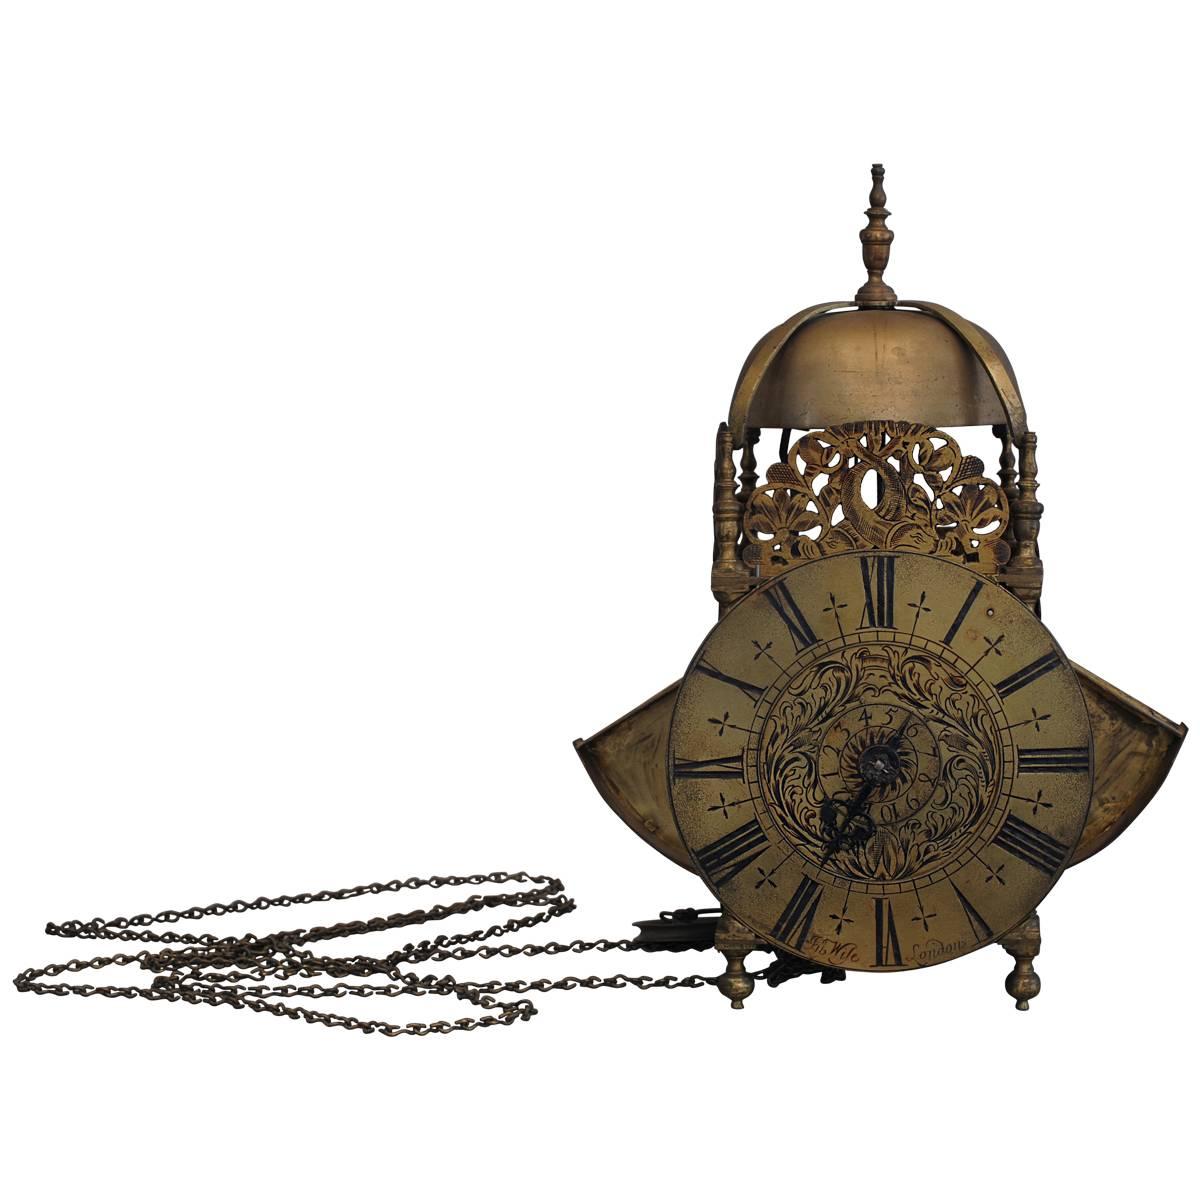 Late Untouched 17th Century English So-Called "Wing Lantern Lock" Signed For Sale